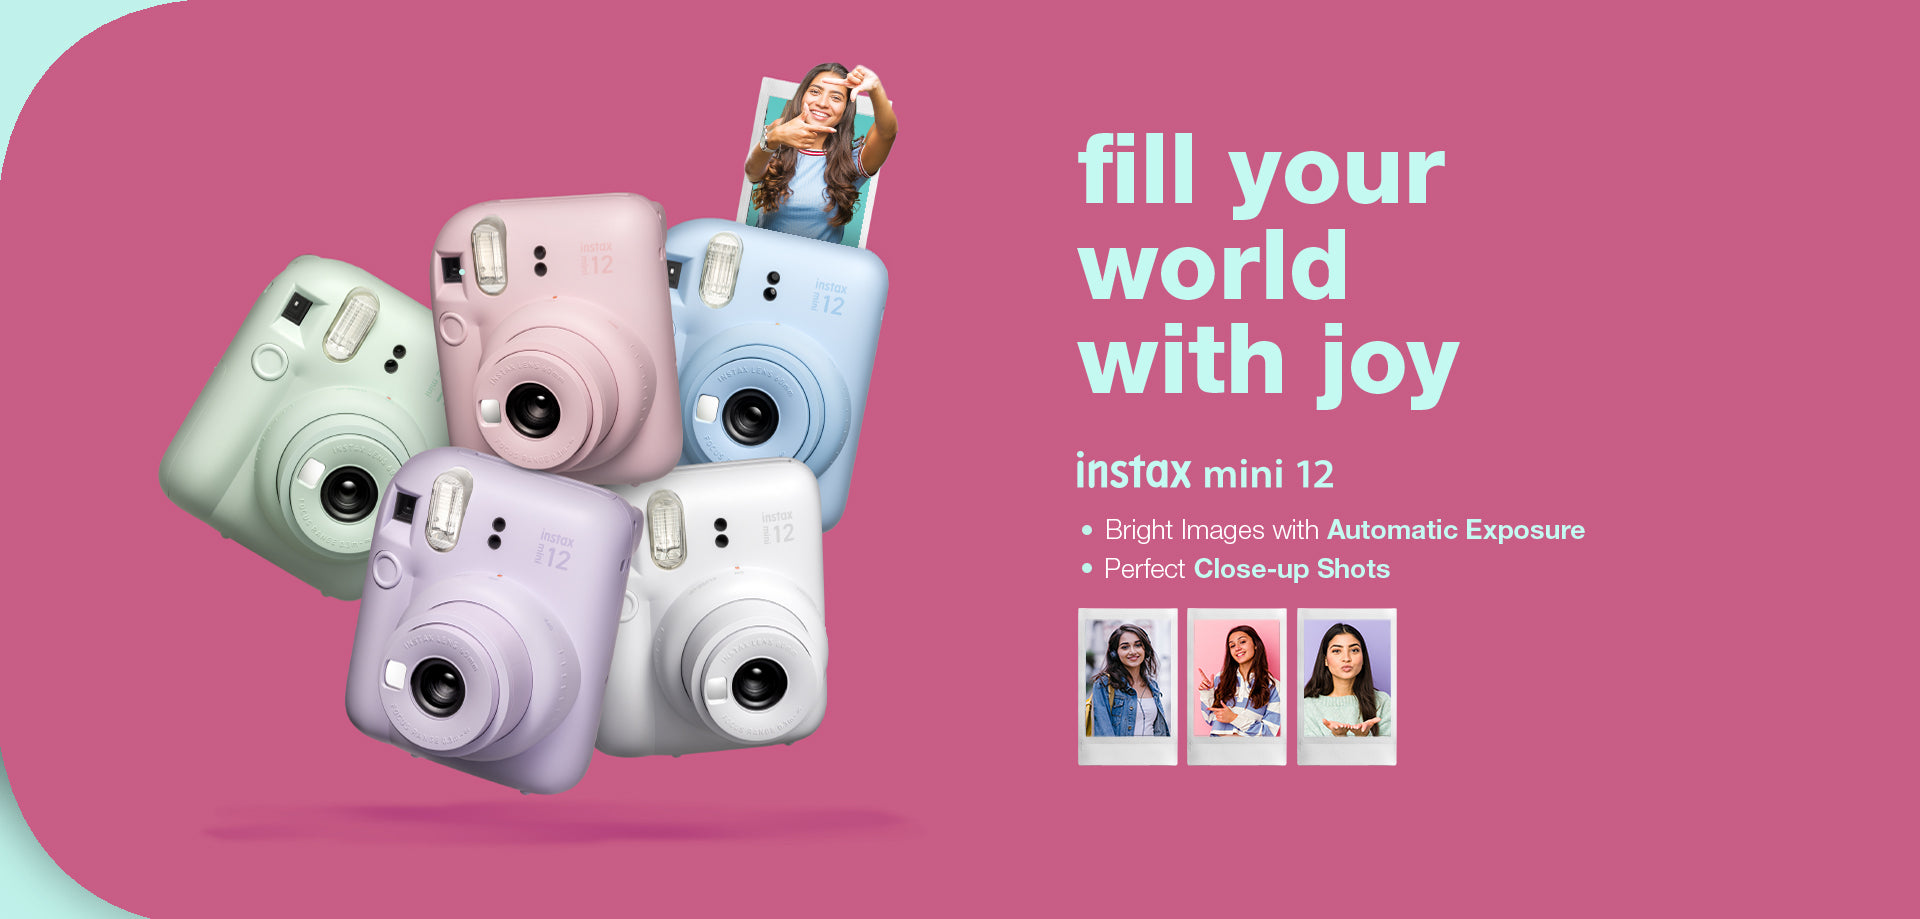 Instax mini 12 with close-up shot feature